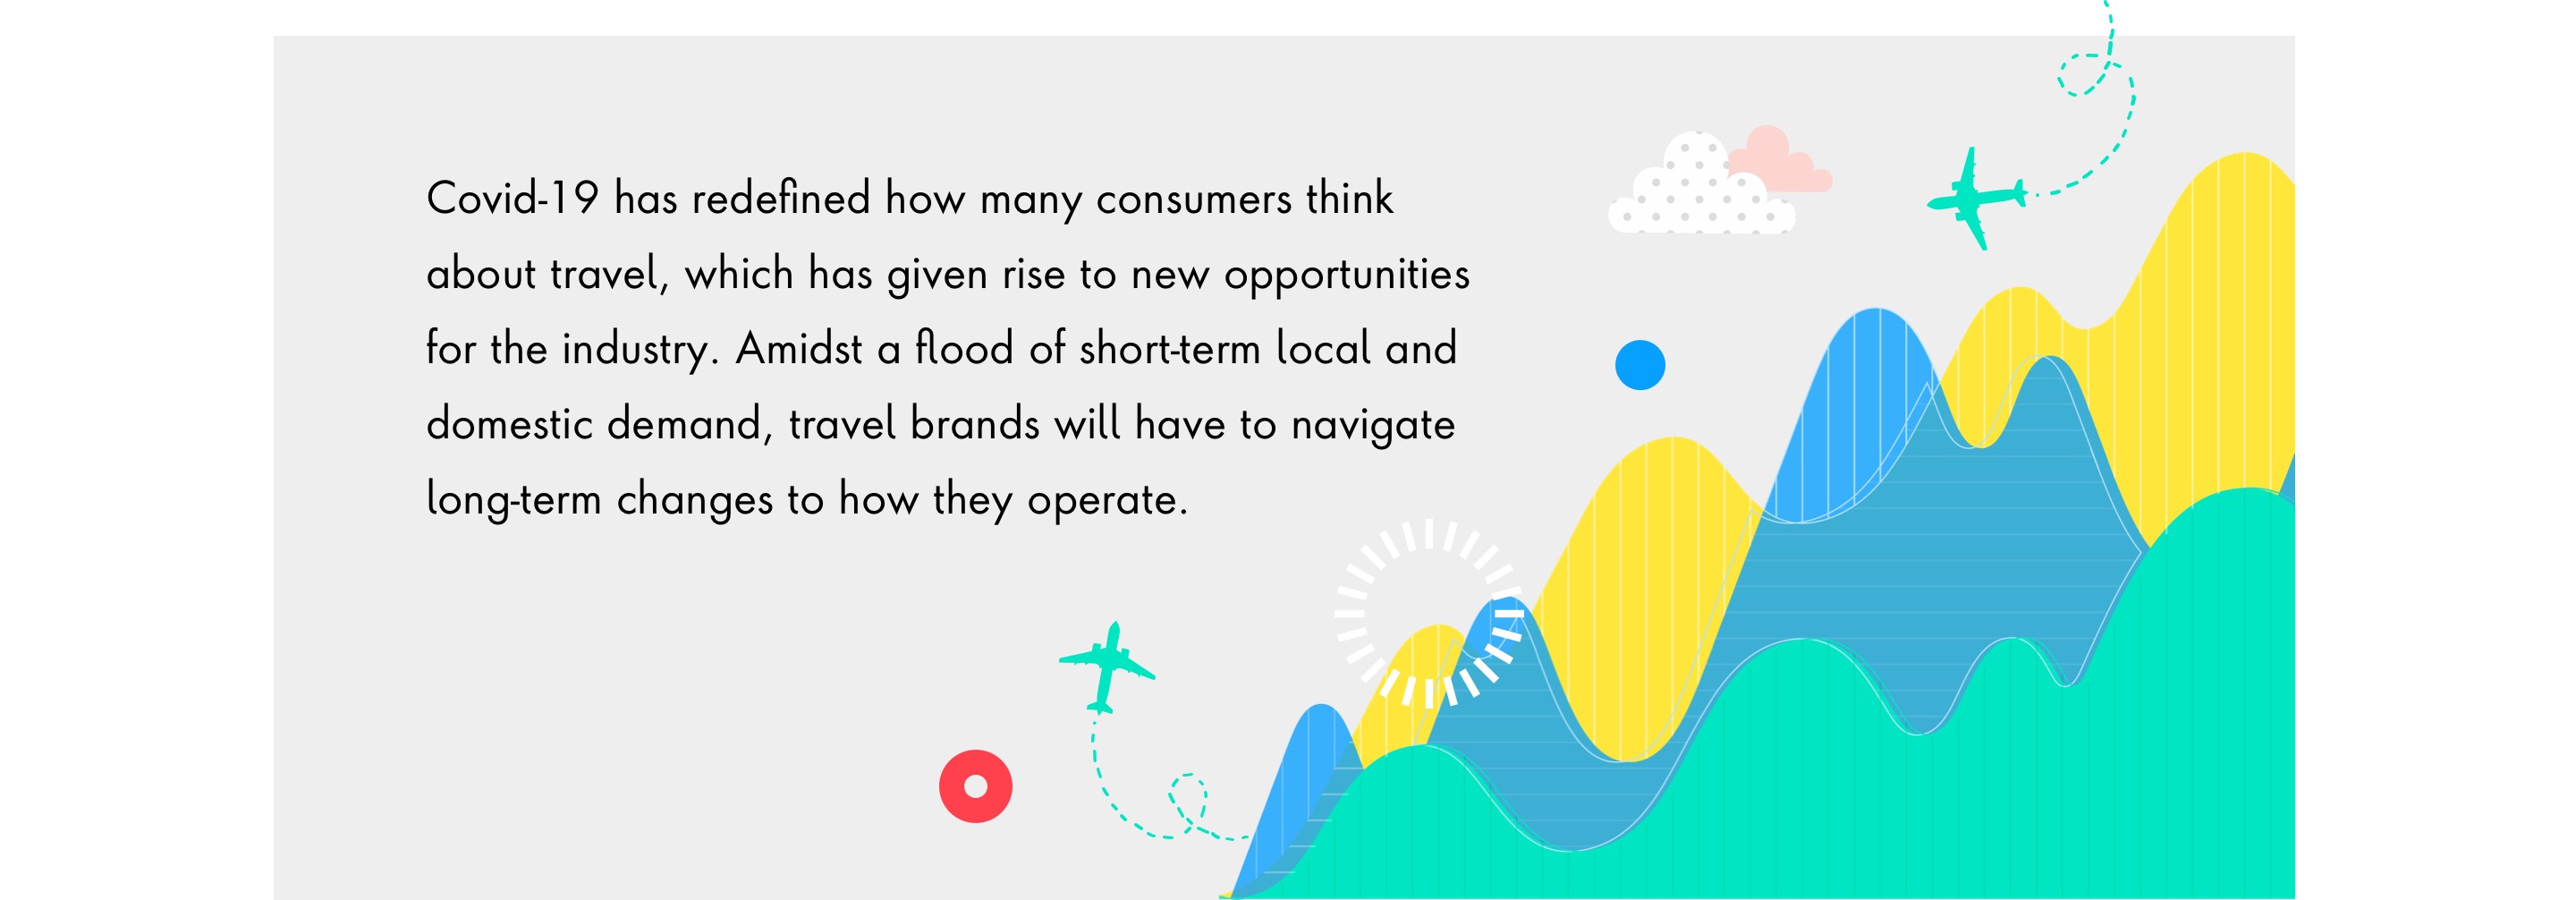 Covid-19 has redefined how many consumers think about travel, which has given rise to new opportunities for the industry. Amidst a flood of short-term local and domestic demand, travel brands will have to navigate long-term changes to how they operate.